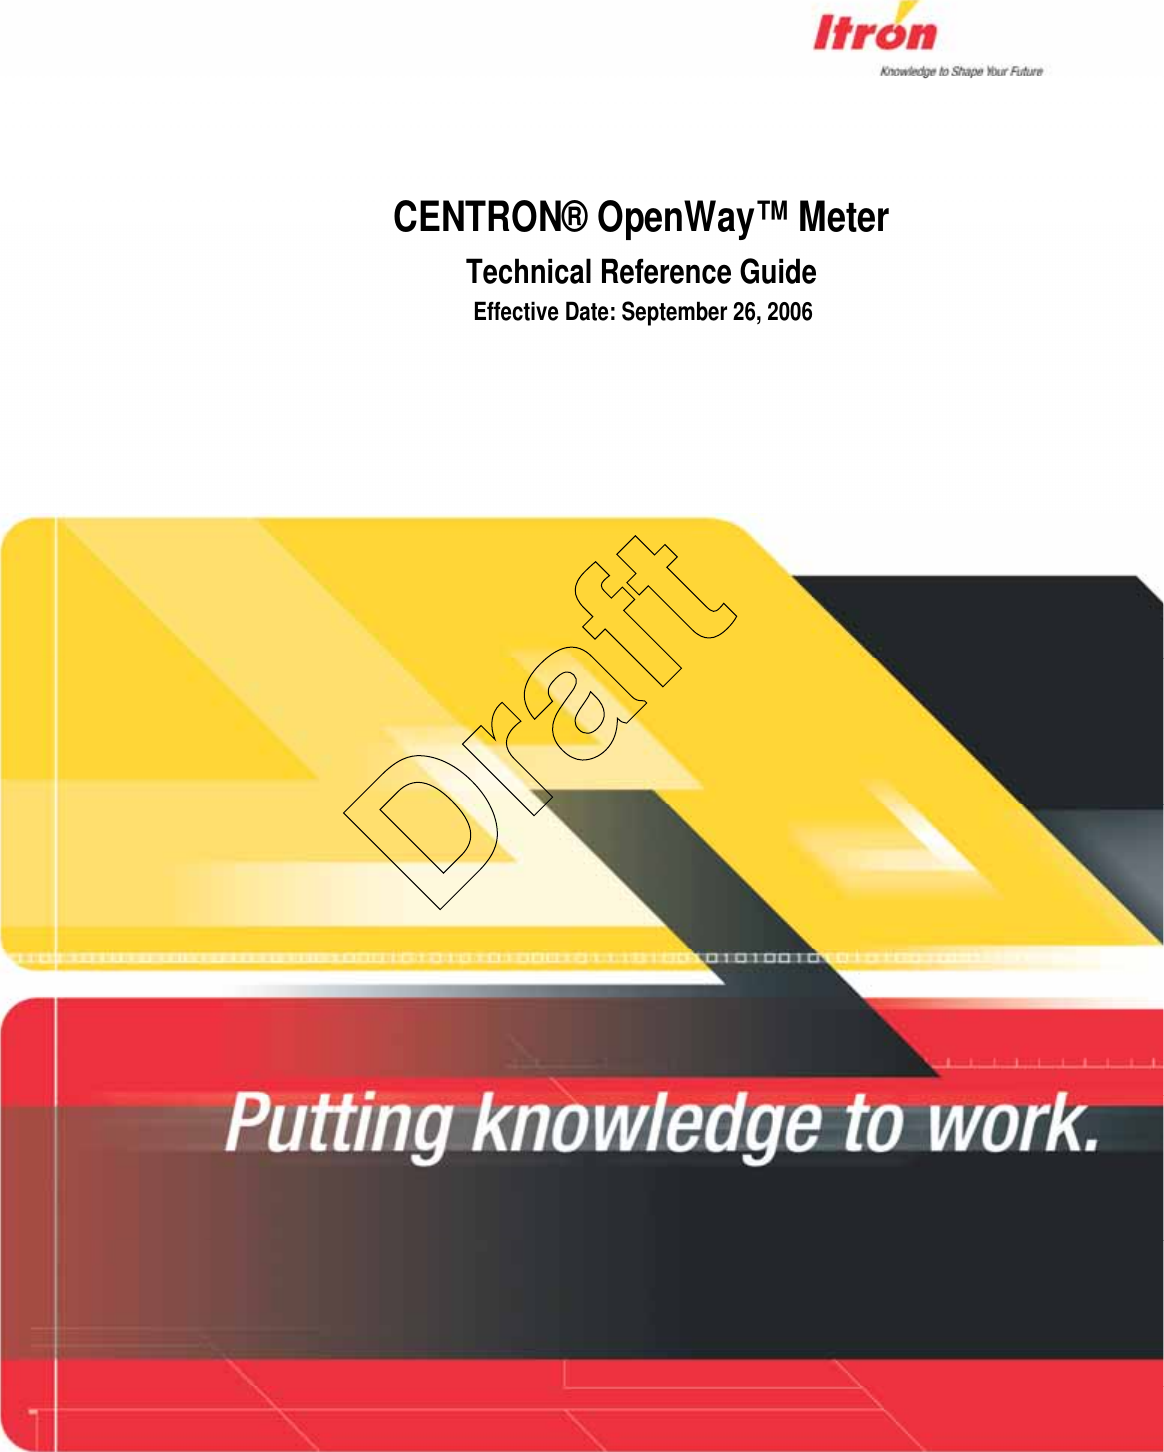   CENTRON® OpenWay™ Meter Technical Reference Guide Effective Date: September 26, 2006                      Draft